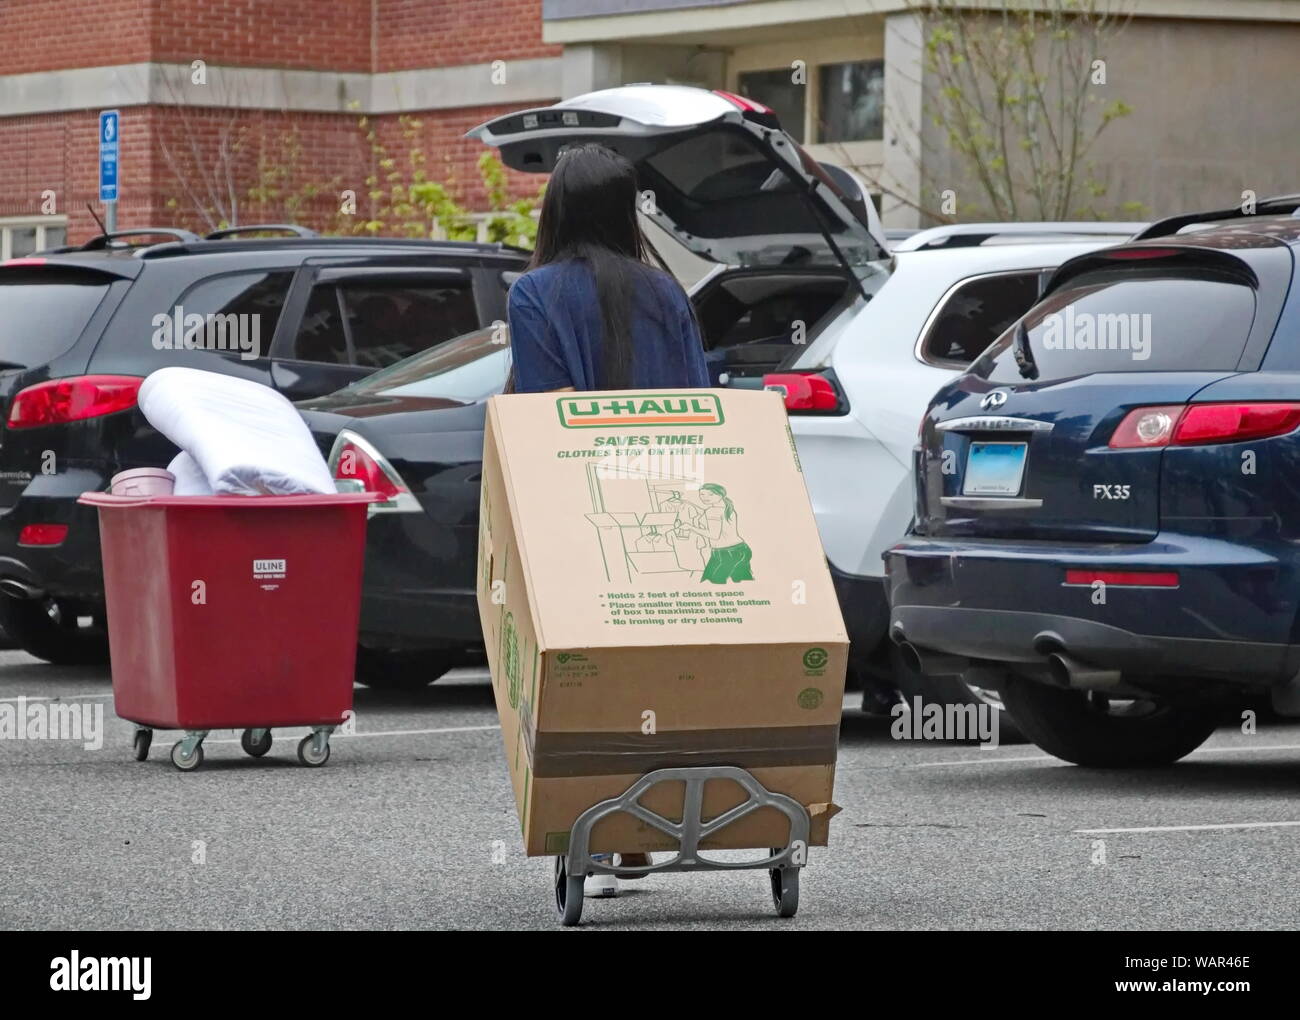 Storrs, CT / USA - May 10, 2019: A college student moves out of the dorm Stock Photo